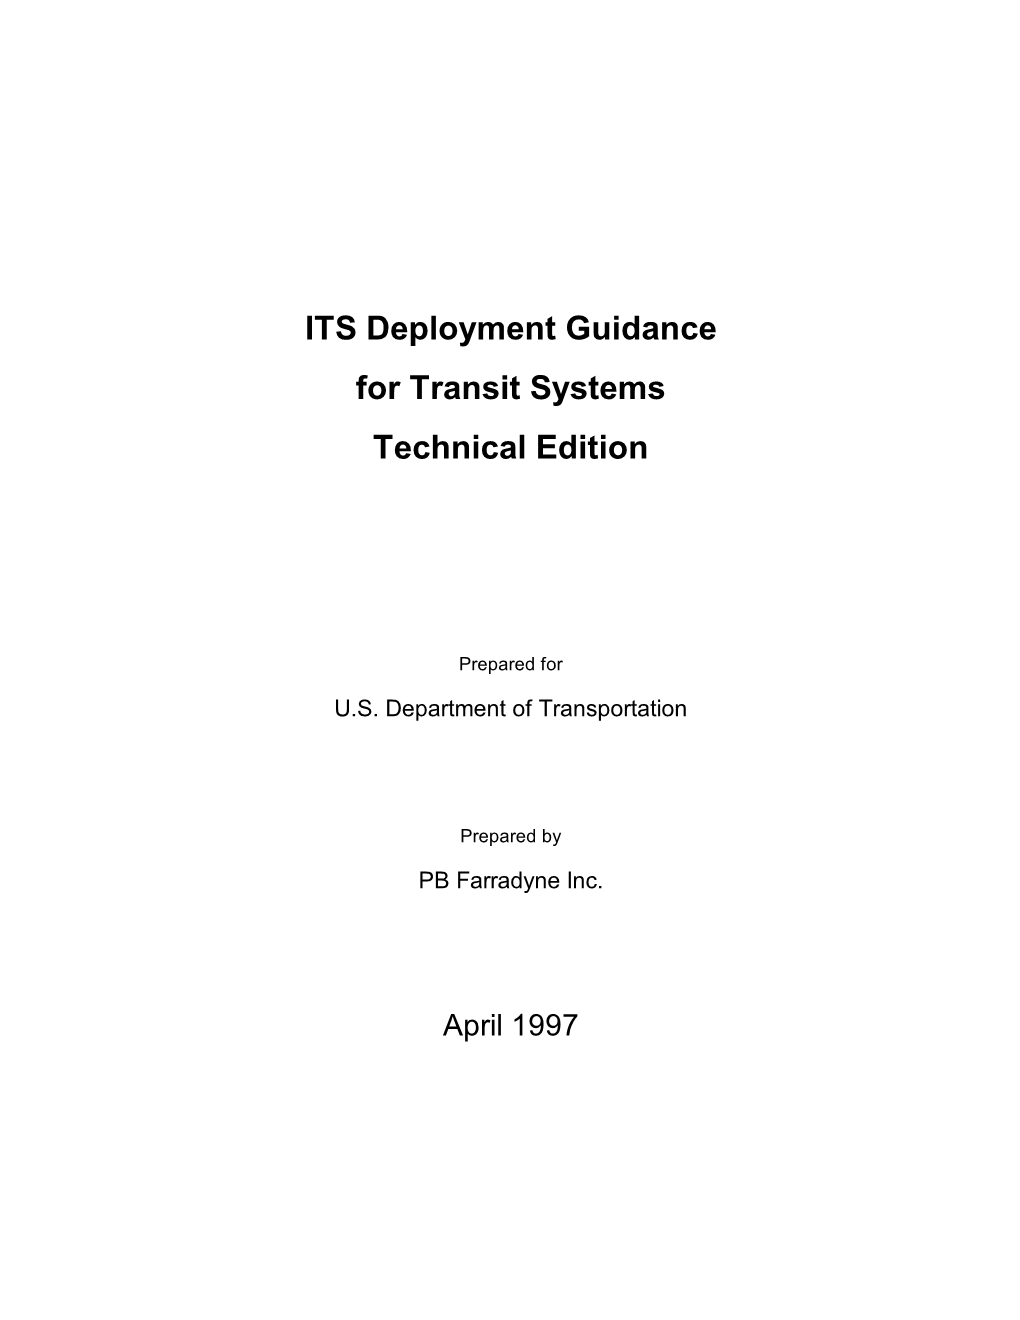 ITS Deployment Guidance for Transit Systems Technical Edition